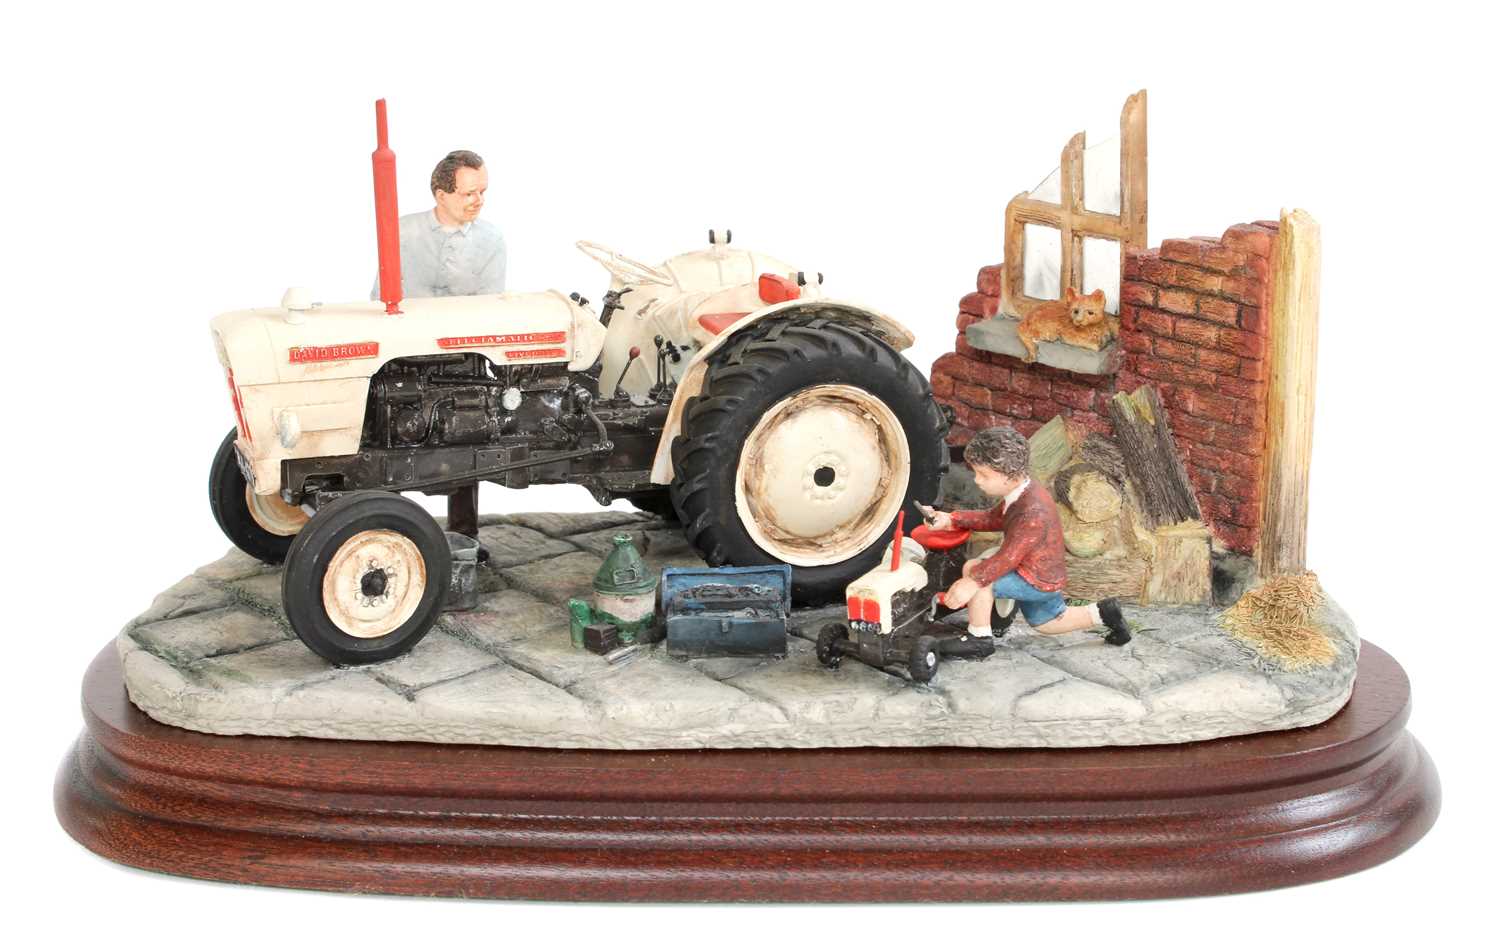 Border Fine Arts 'Like Father, Like Son', model No. B0859 by Ray Ayres, on wood base, with box and